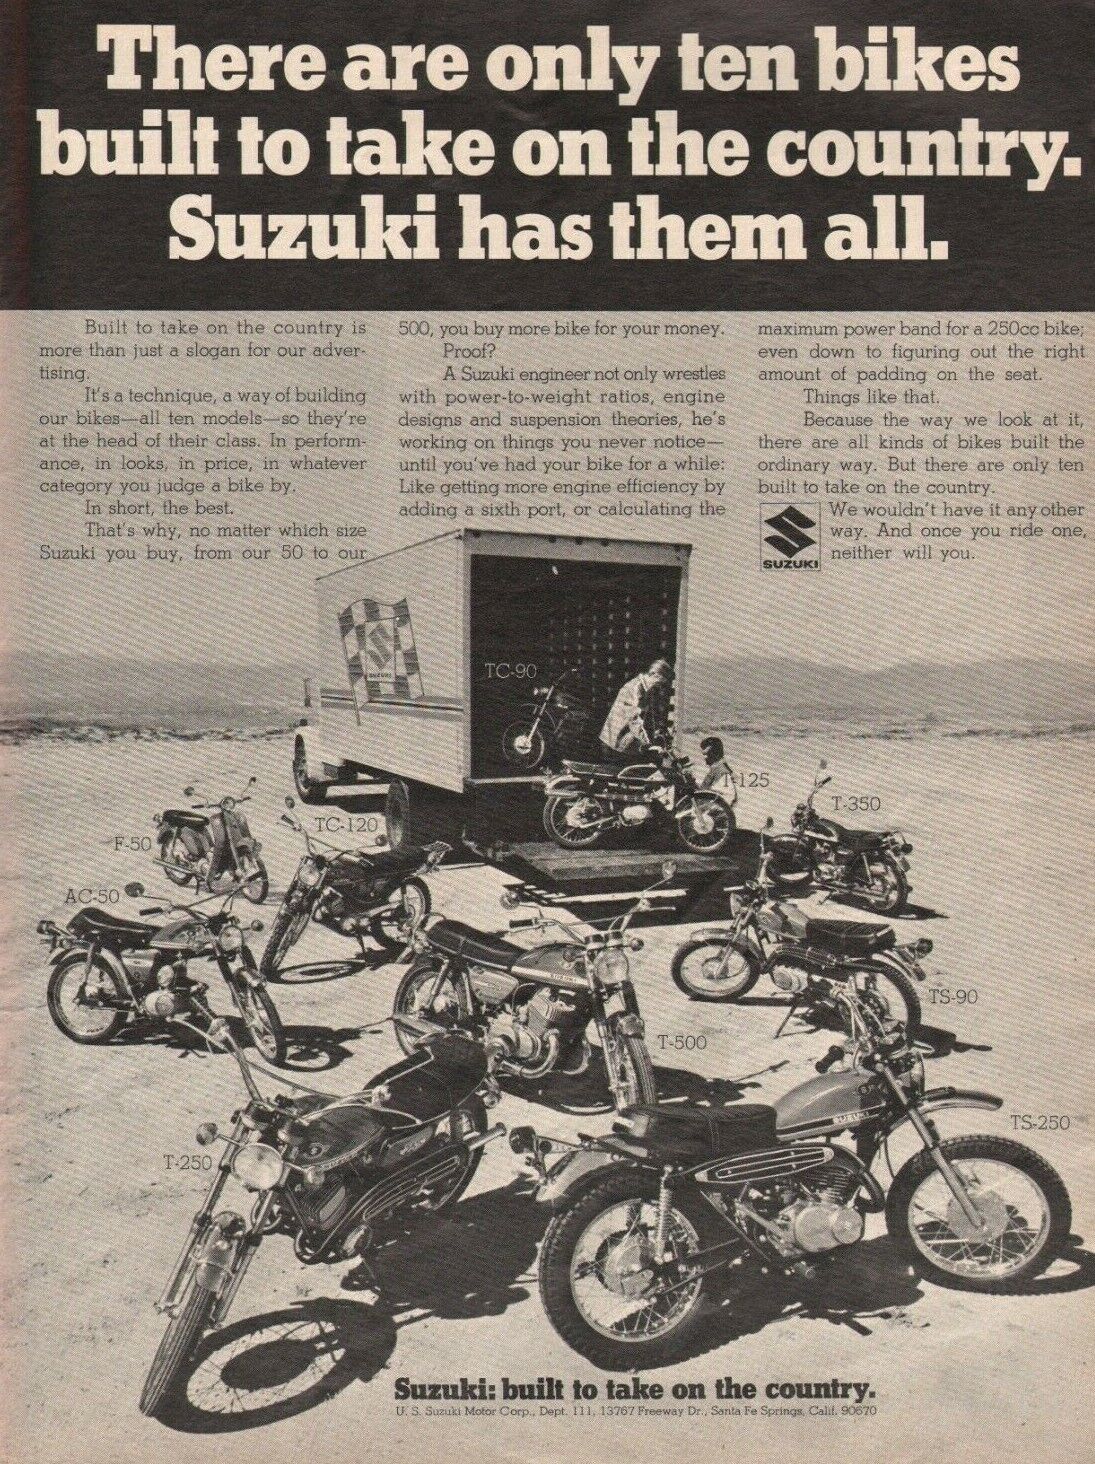 1970 Suzuki - Built to take on the country - Vintage Motorcycle Ad